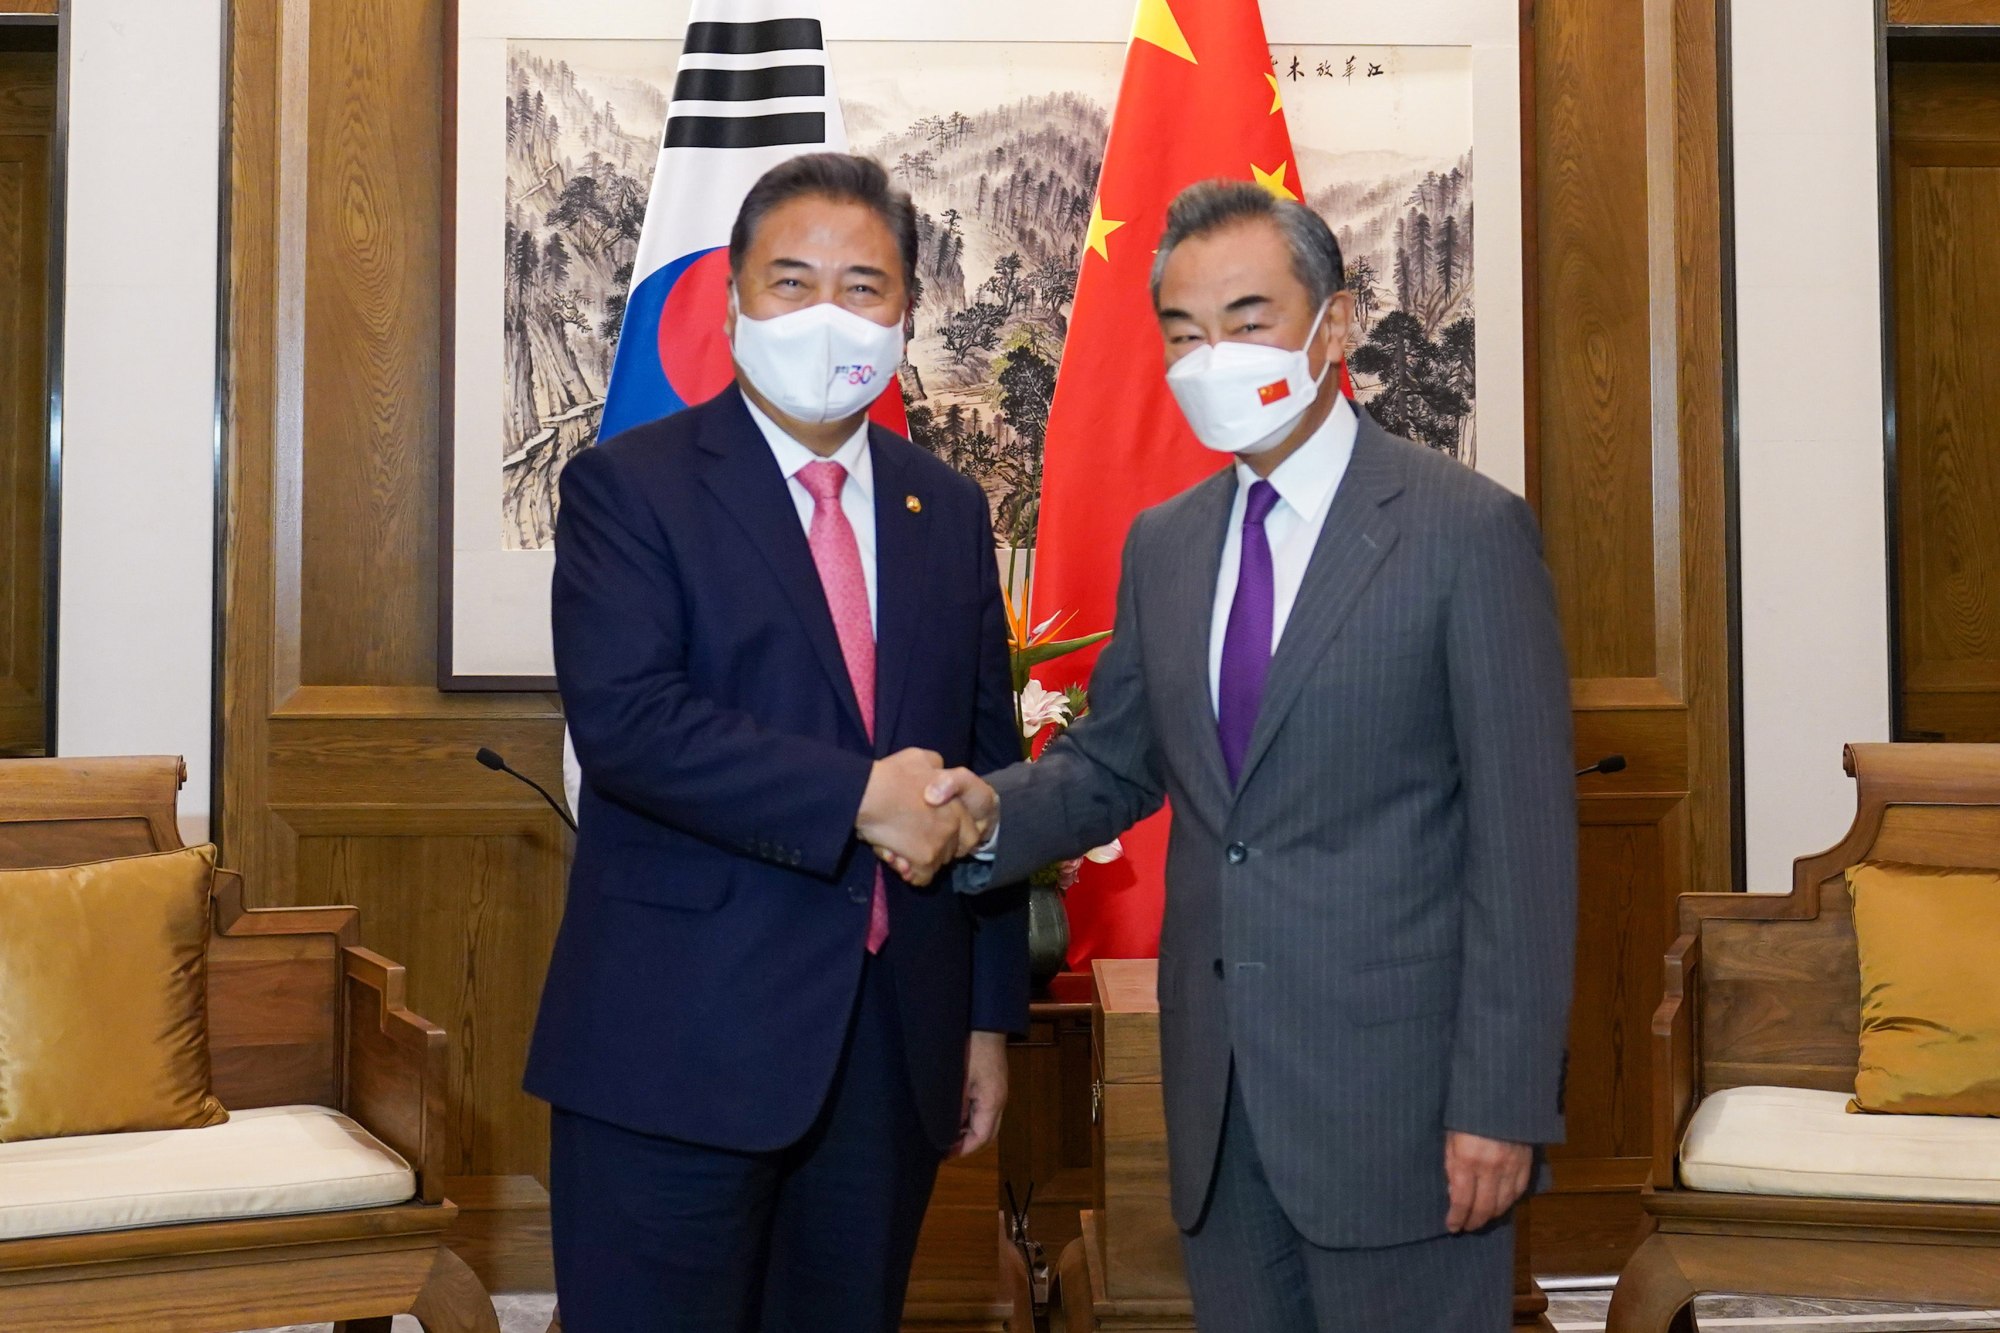 South Korean Foreign Minister Park Jin, left, poses for a photo with his Chinese counterpart Wang Yi ahead of their talks in the eastern port city of Qingdao on August 9, 2022. Photo: EPA-EFE